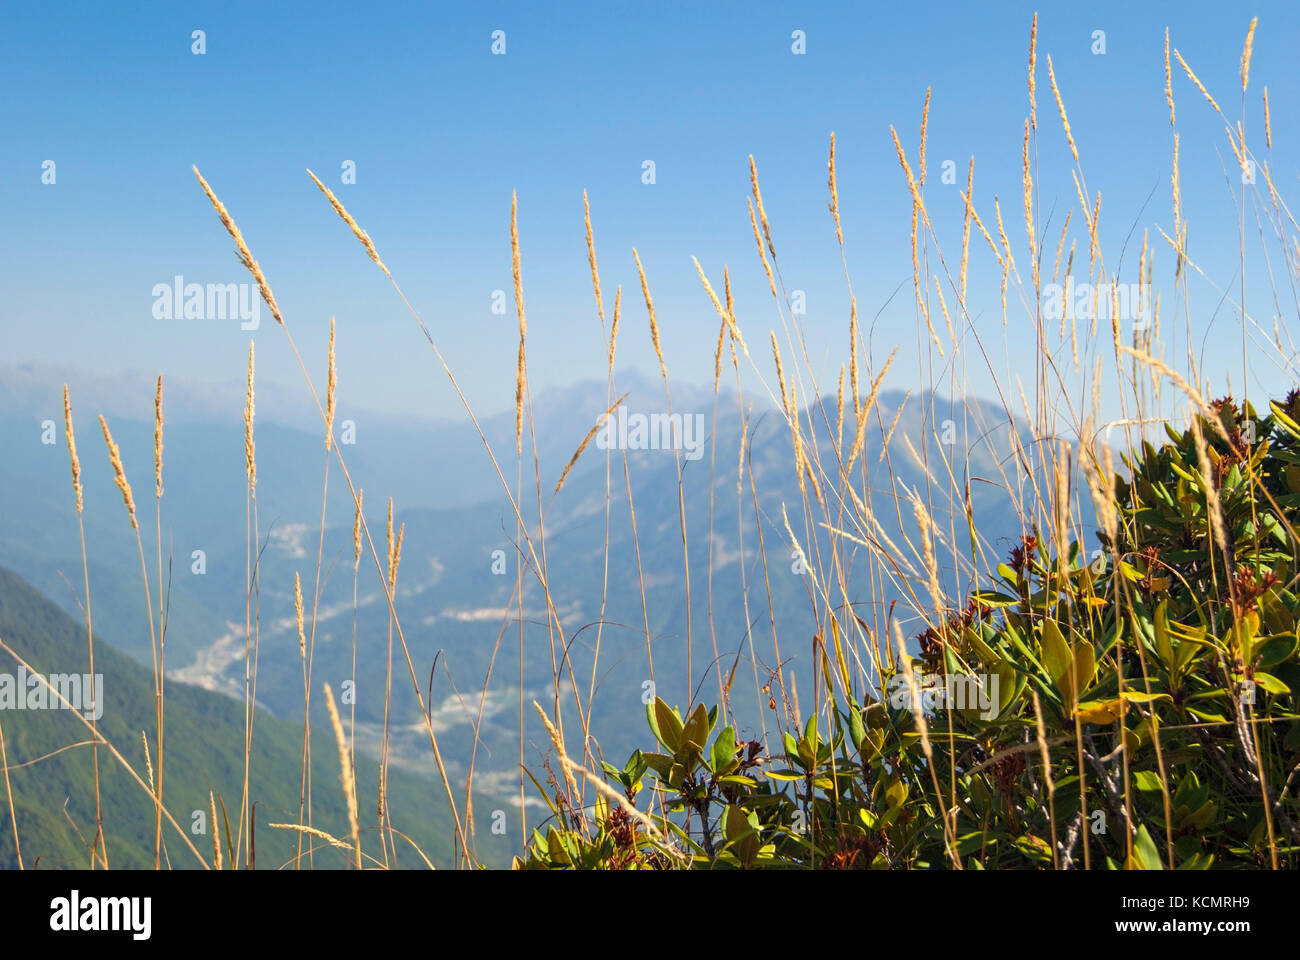 on the foreground in focus - branches of the rhododendron and dry spikelets of autumn grass; Blurred background - sky and mountain peaks in clear weat Stock Photo